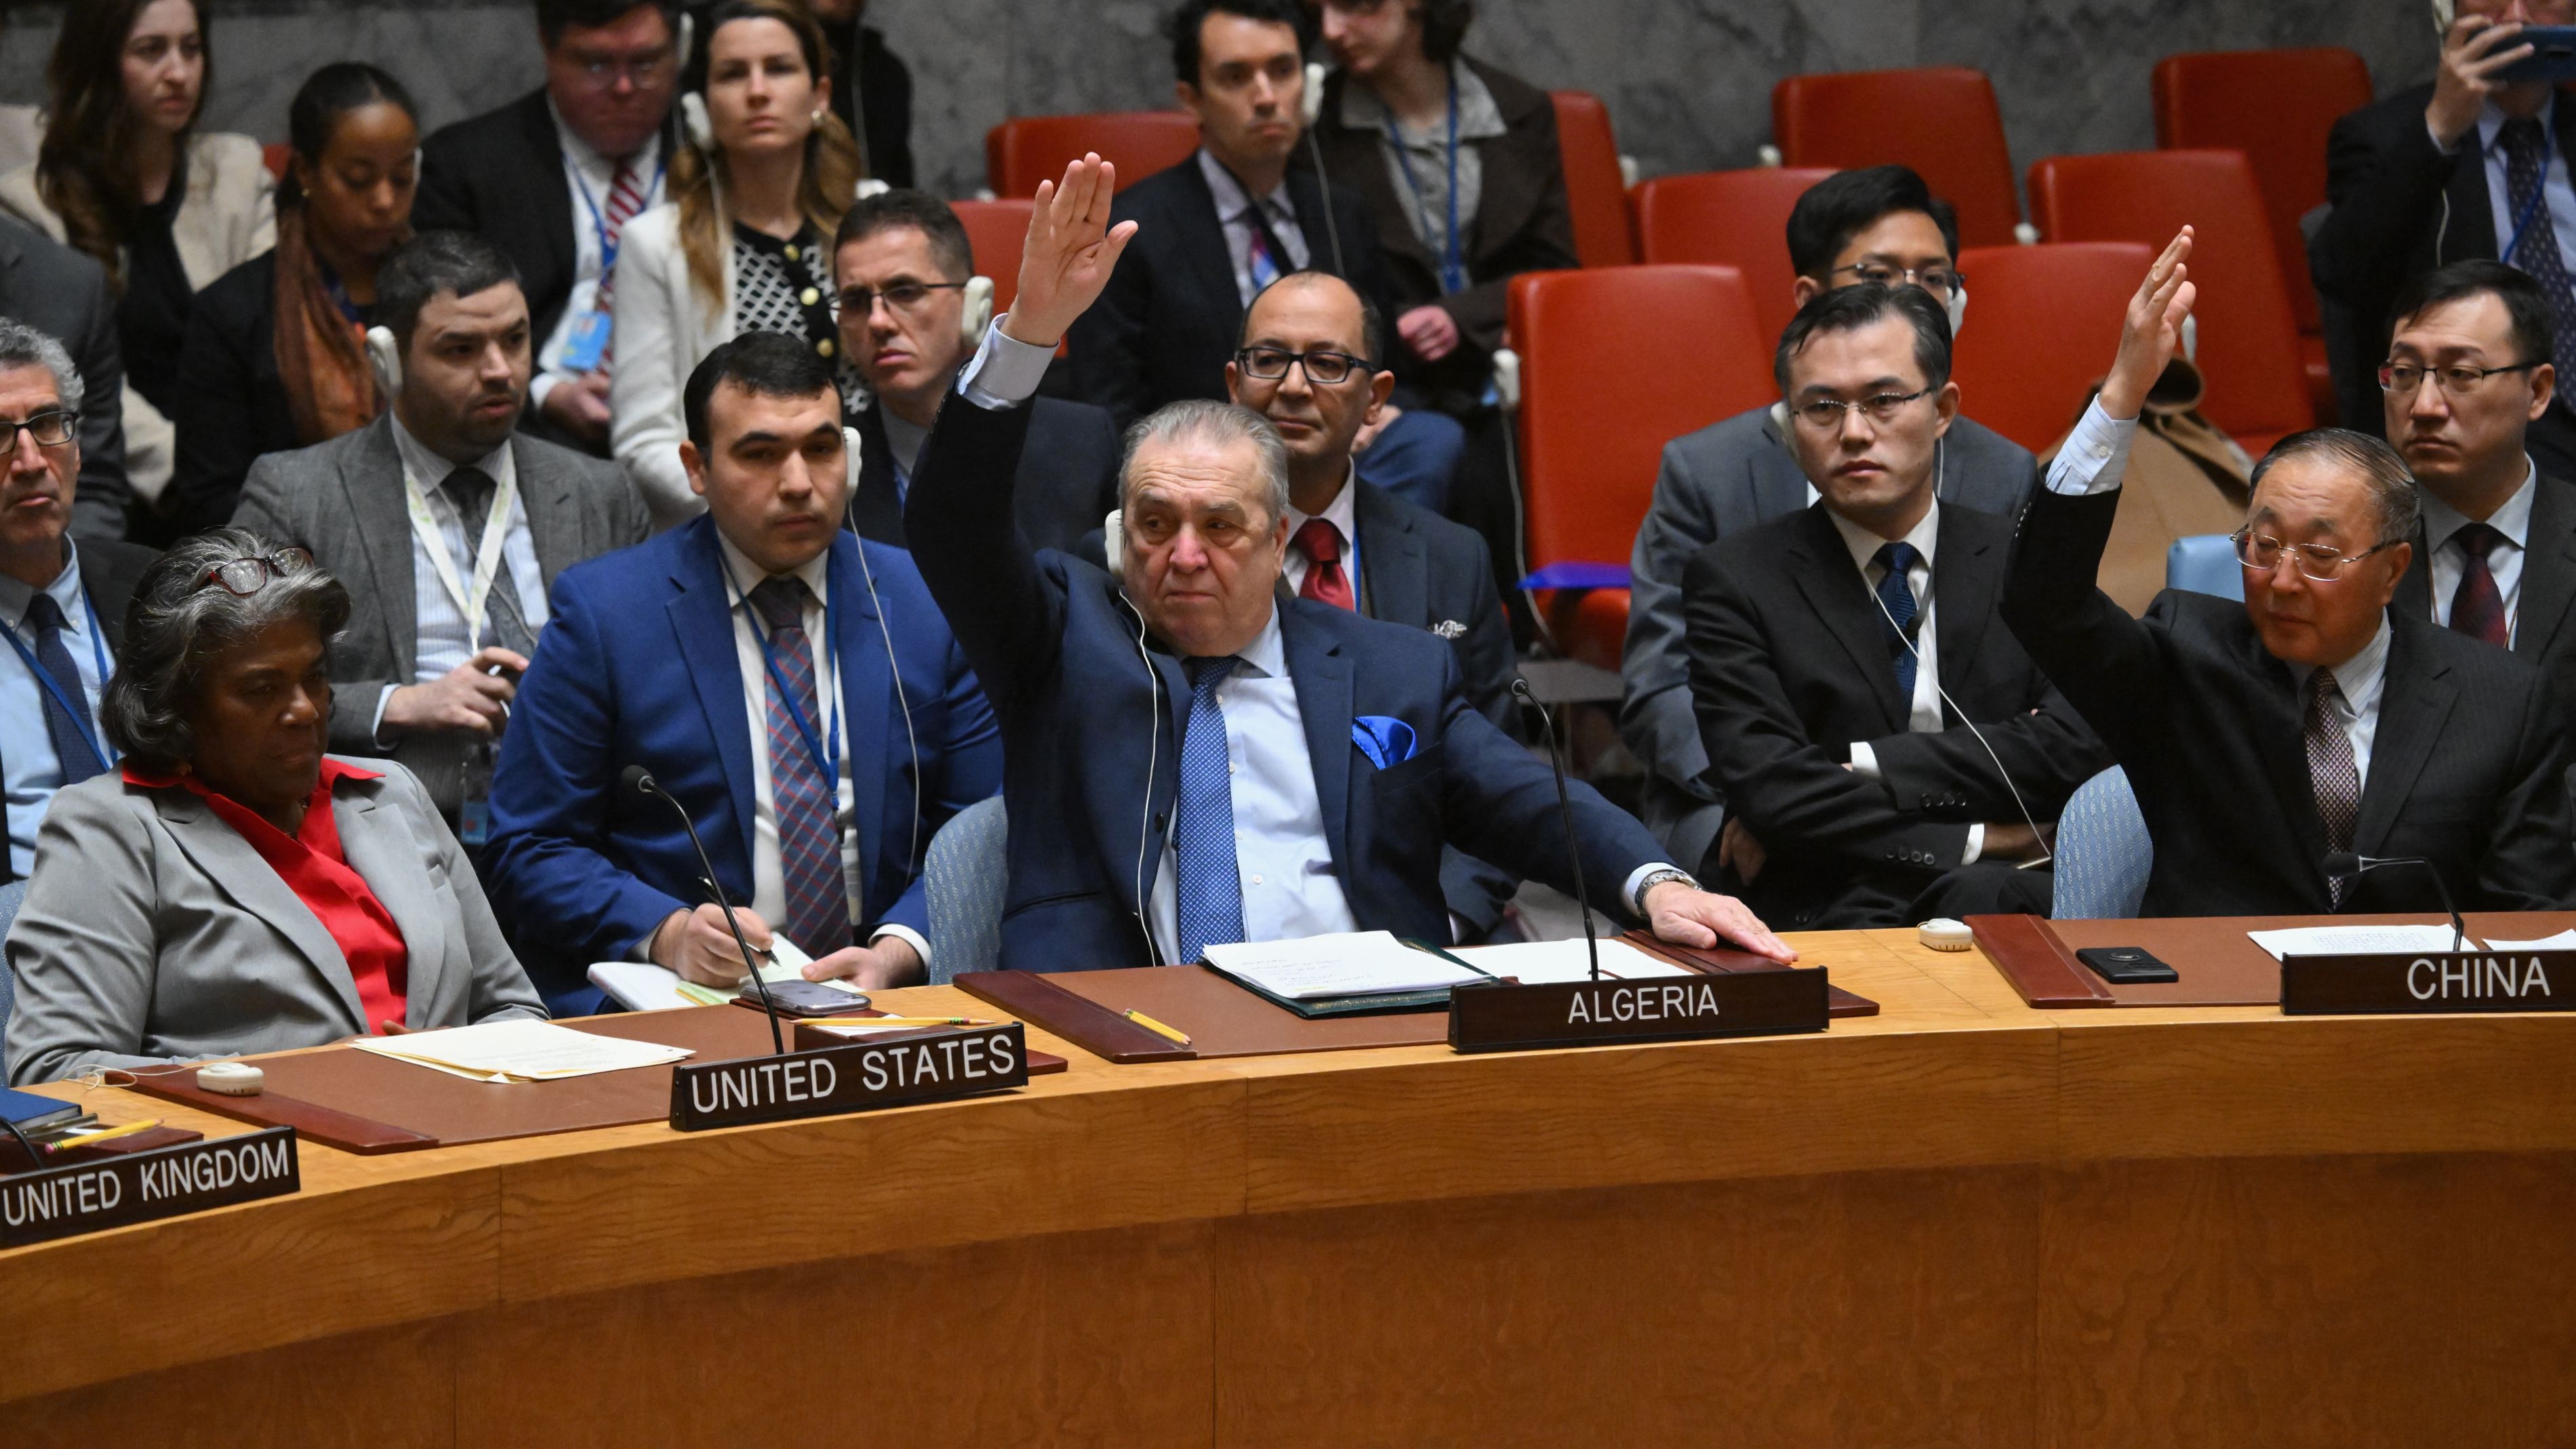 All eyes on the U.S. Ambassador as the UN council calls for an immediate ceasefire in Gaza. /Angela Weiss/AFP